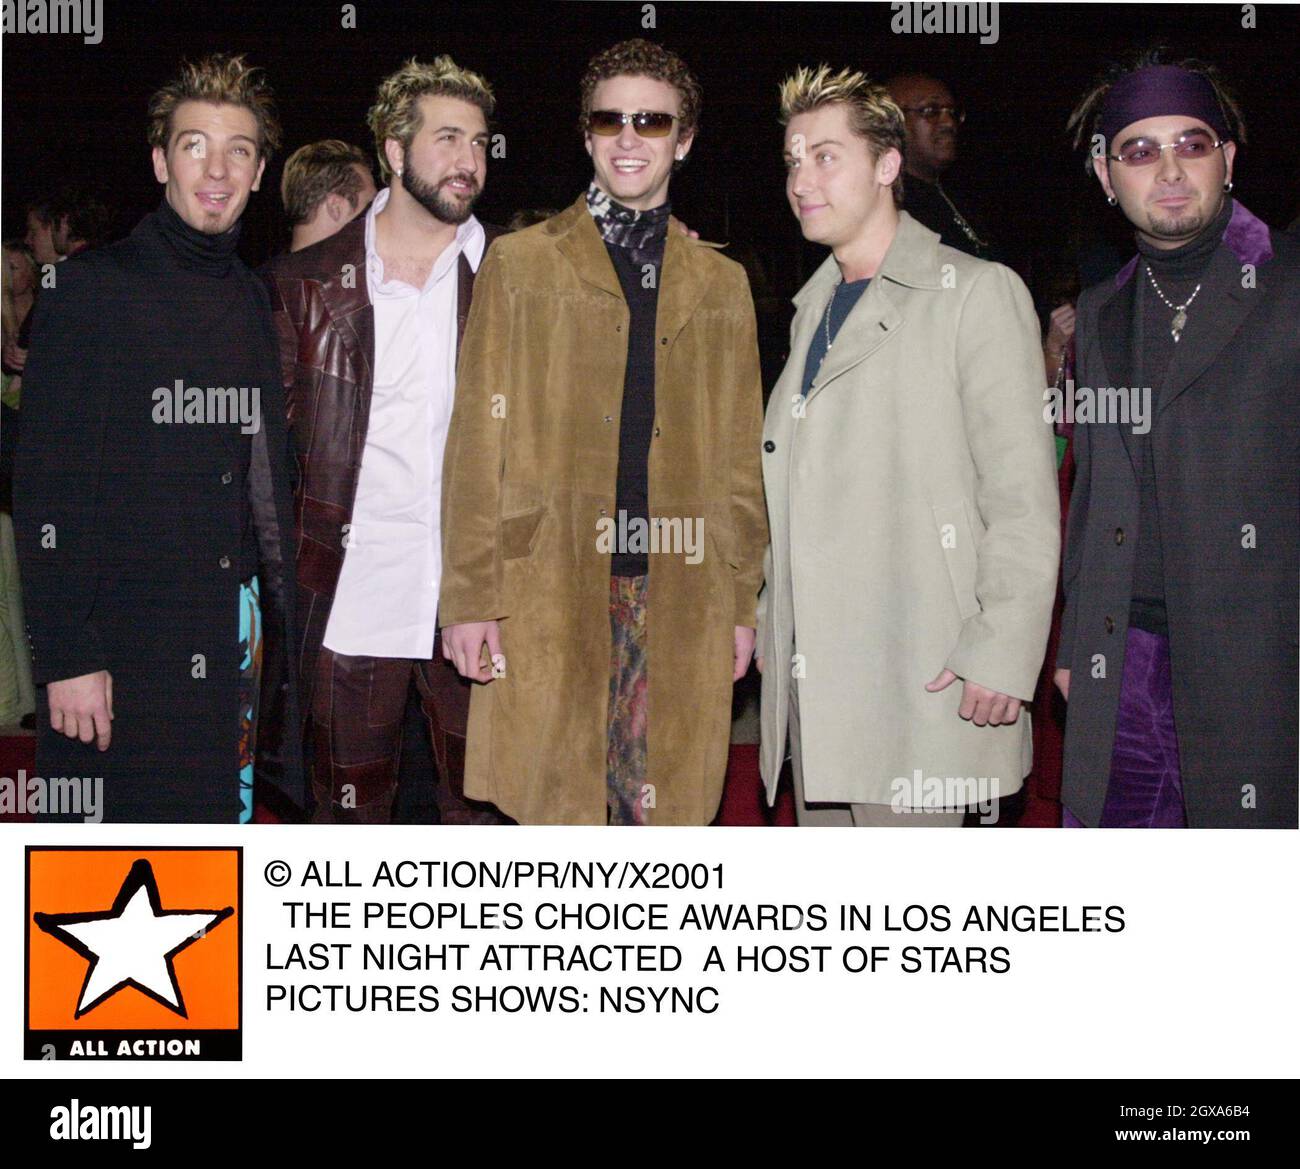 Â© ALL ACTION/PR/NY/X2001   THE PEOPLES CHOICE AWARDS IN LOS ANGELES LAST NIGHT ATTRACTED  A HOST OF STARS PICTURES SHOWS: NSYNC  Stock Photo